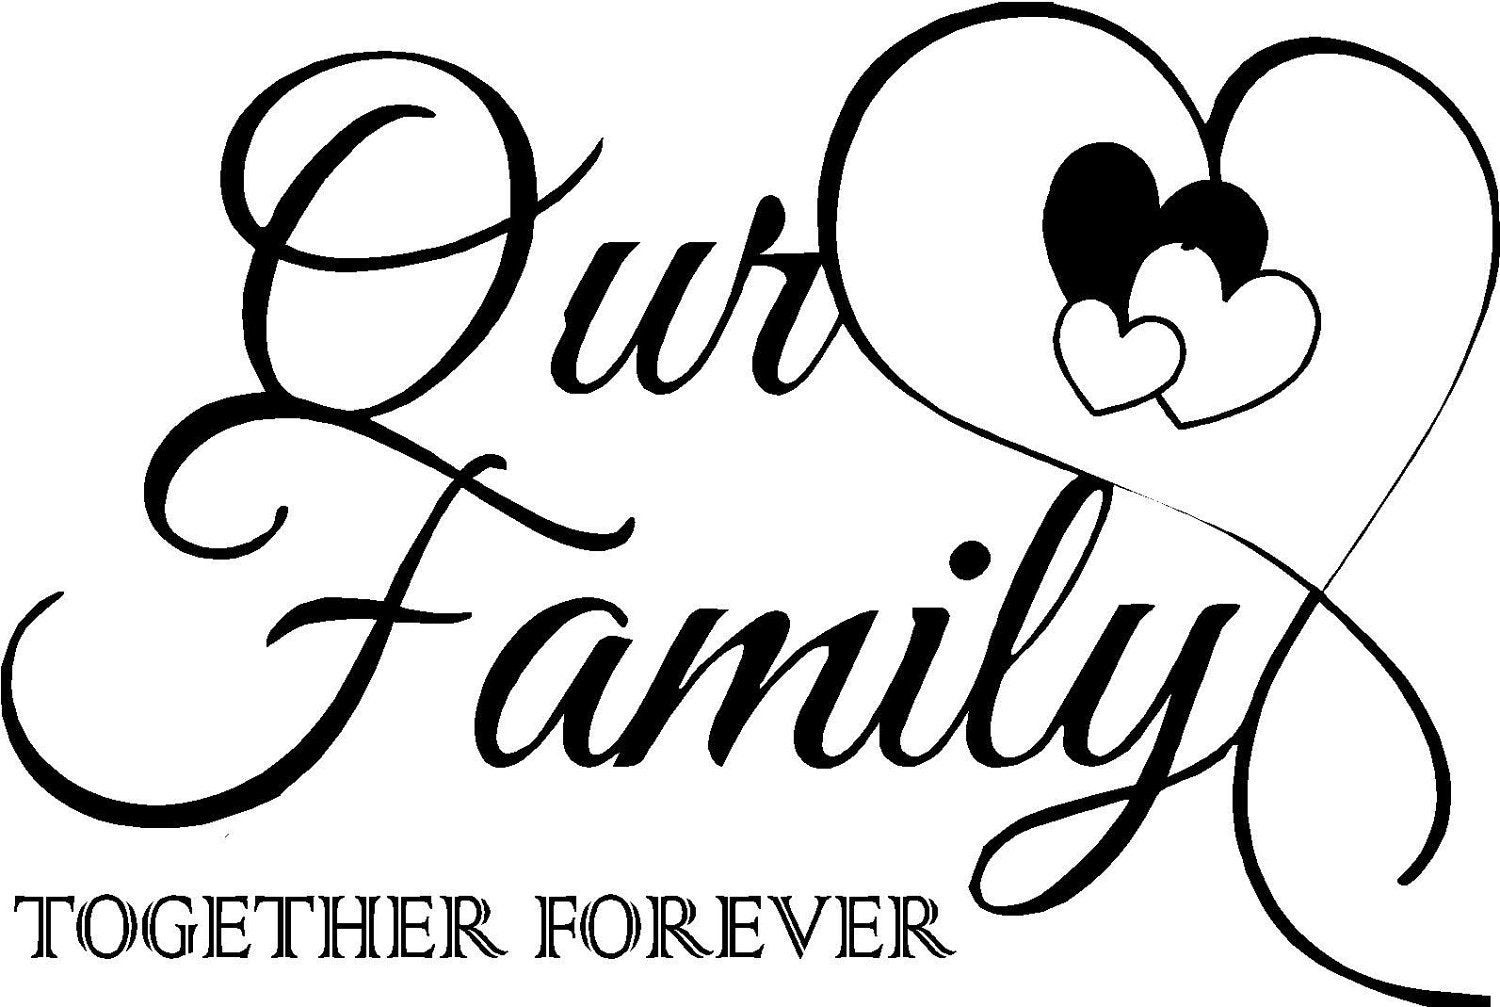 Family Forever Quotes
 Quote Our family to her forever with by vinylforall on Etsy